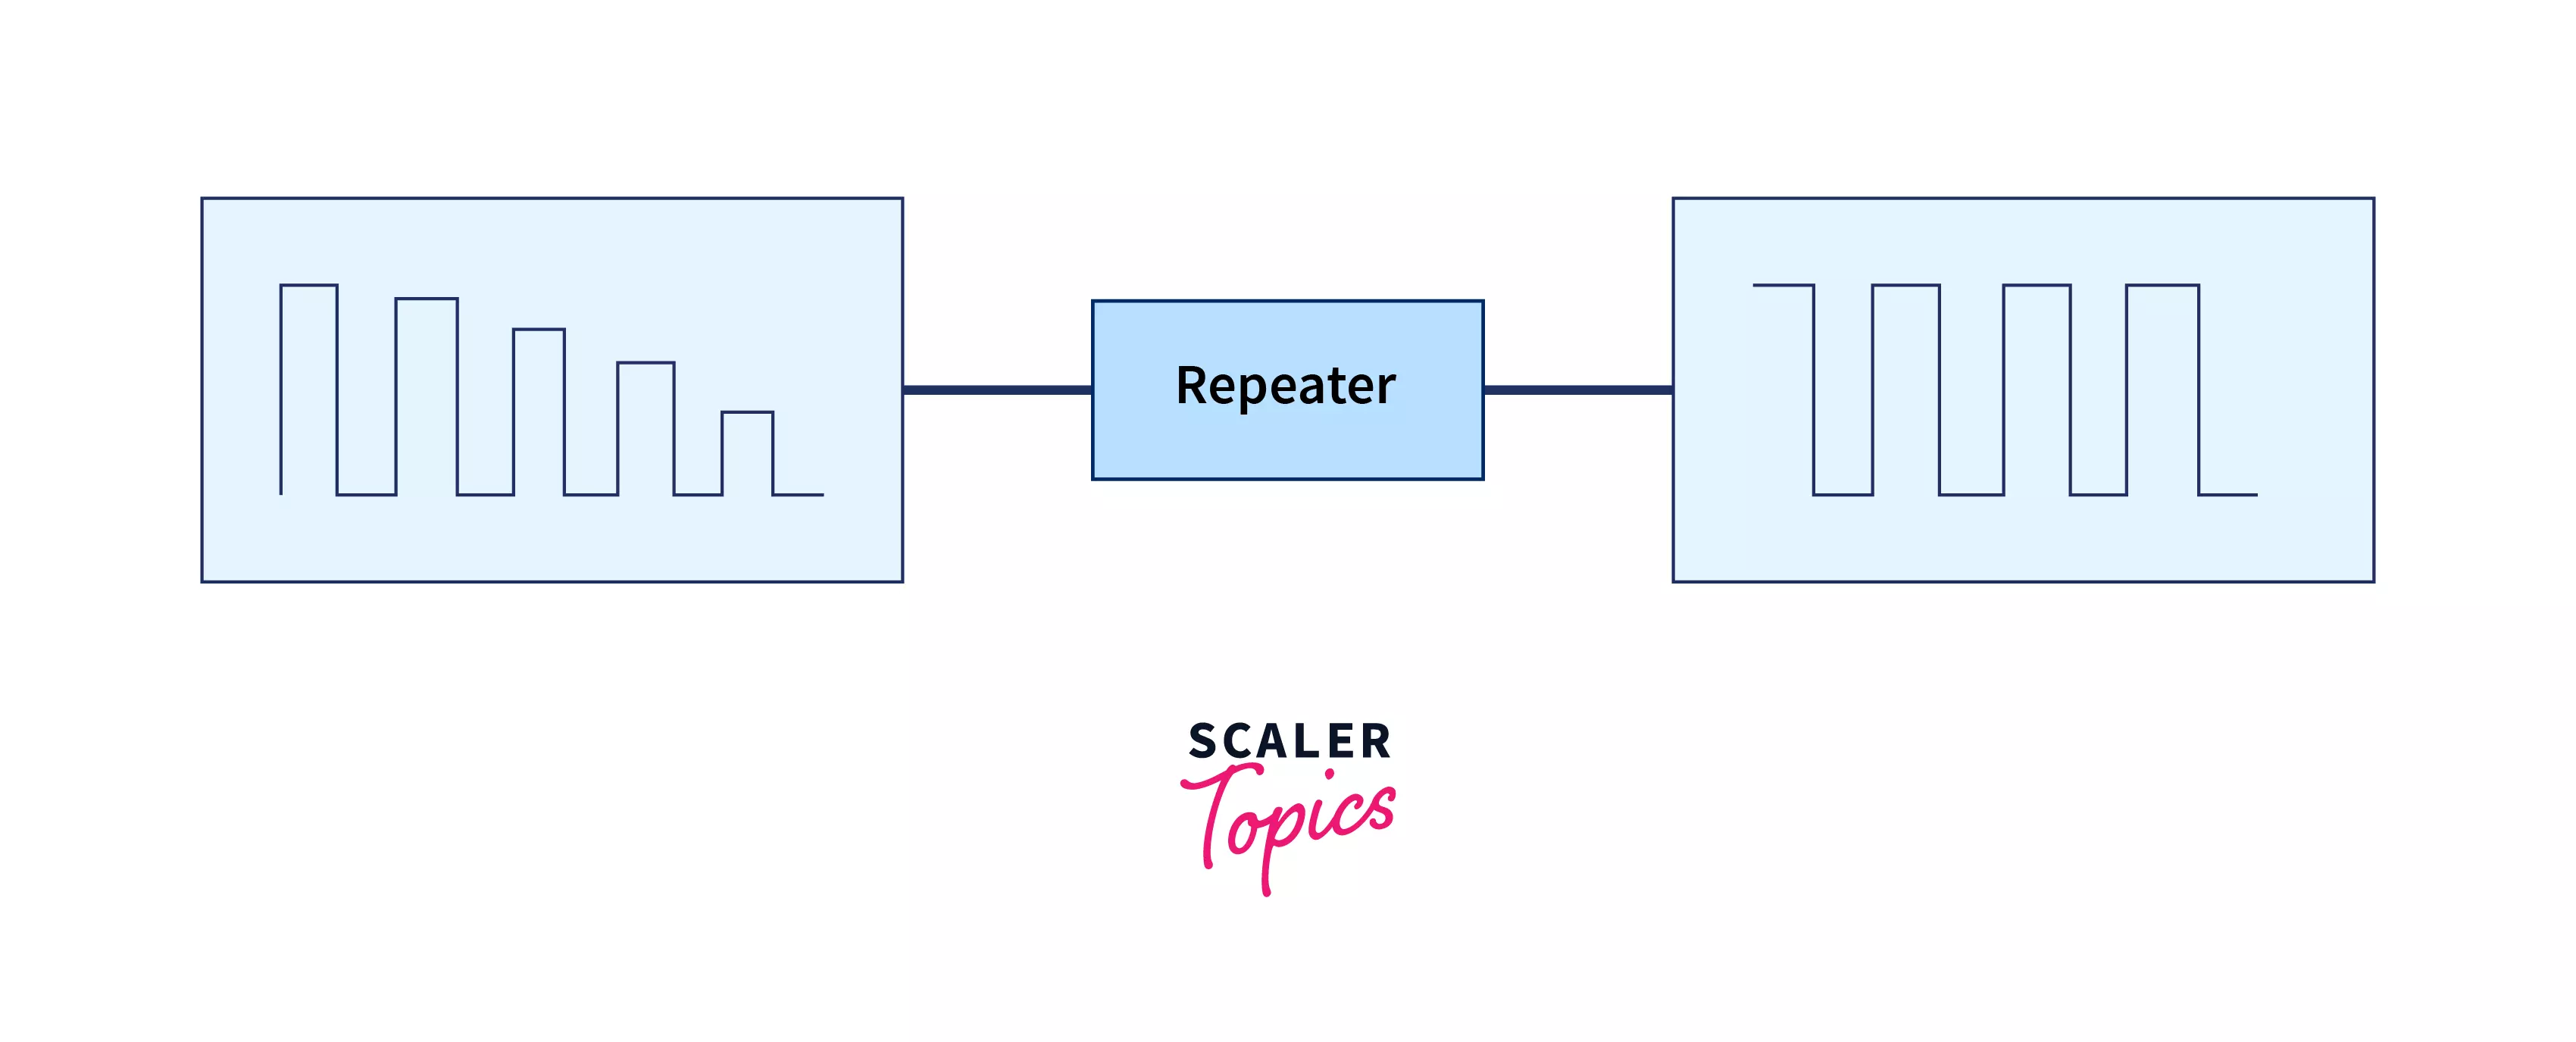 What are repeaters in computer networks